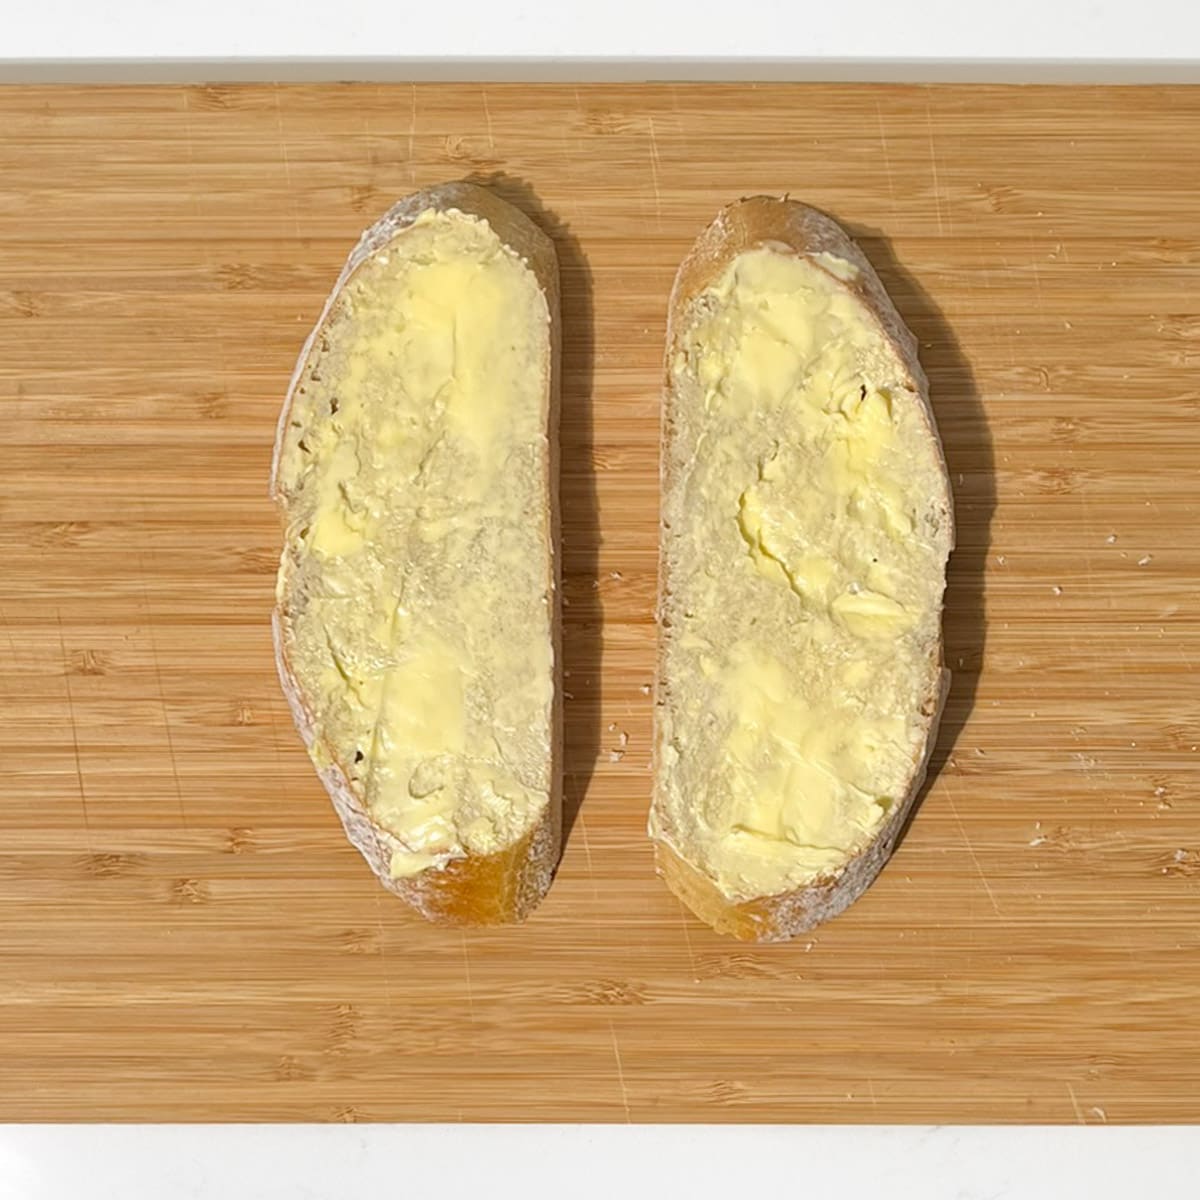 Two slices of buttered bread for the sourdough grilled cheese sandwich.